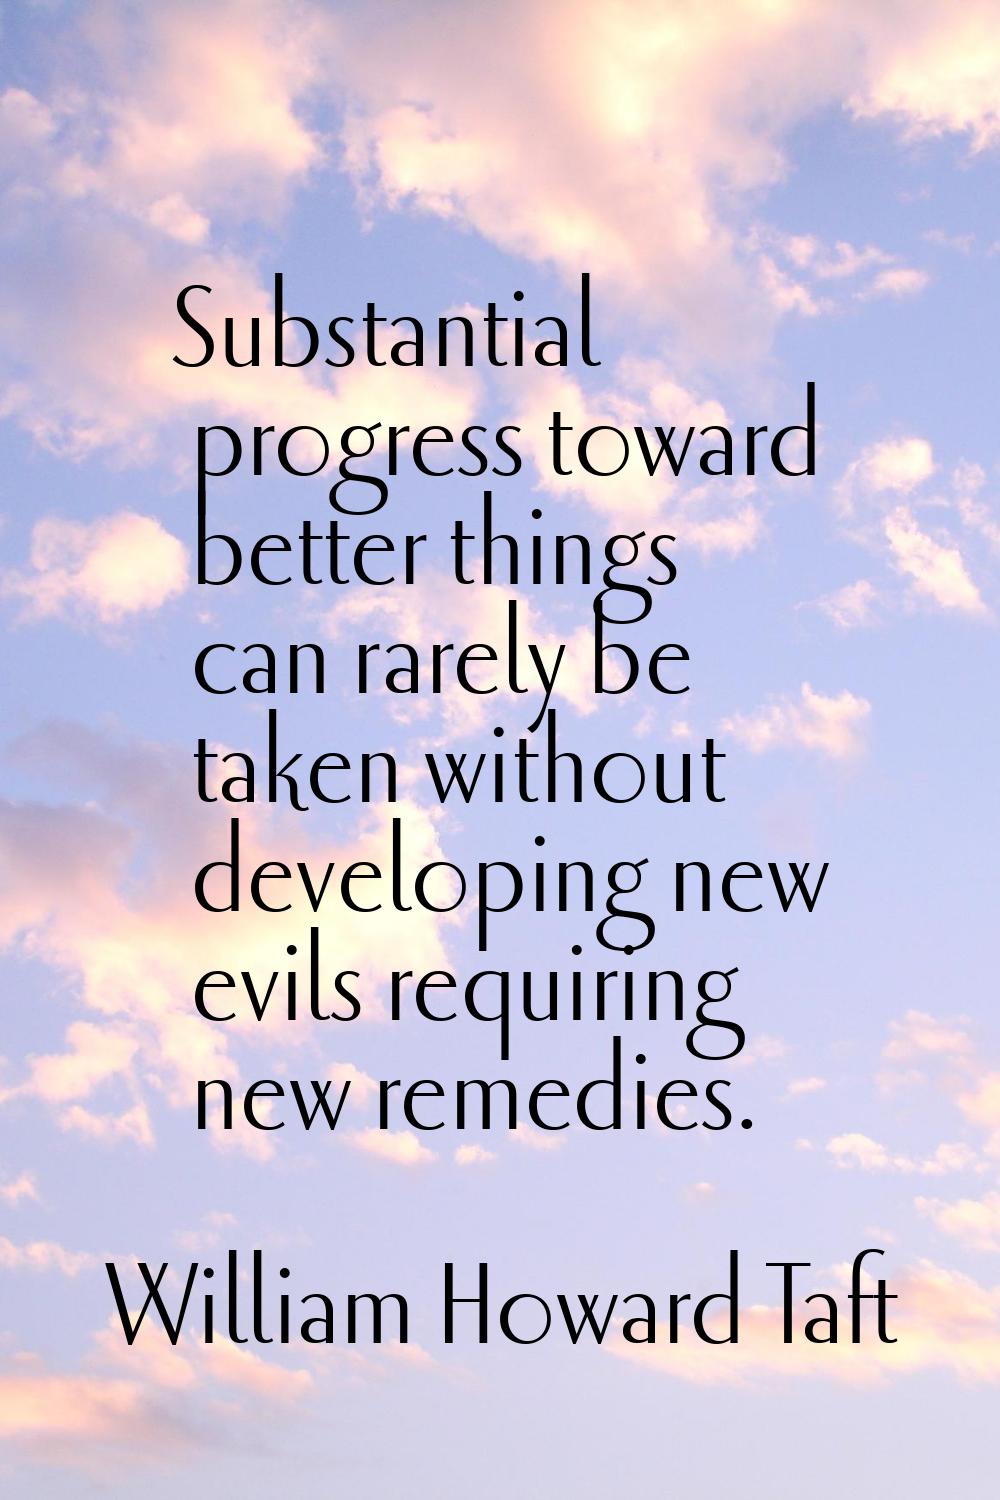 Substantial progress toward better things can rarely be taken without developing new evils requirin